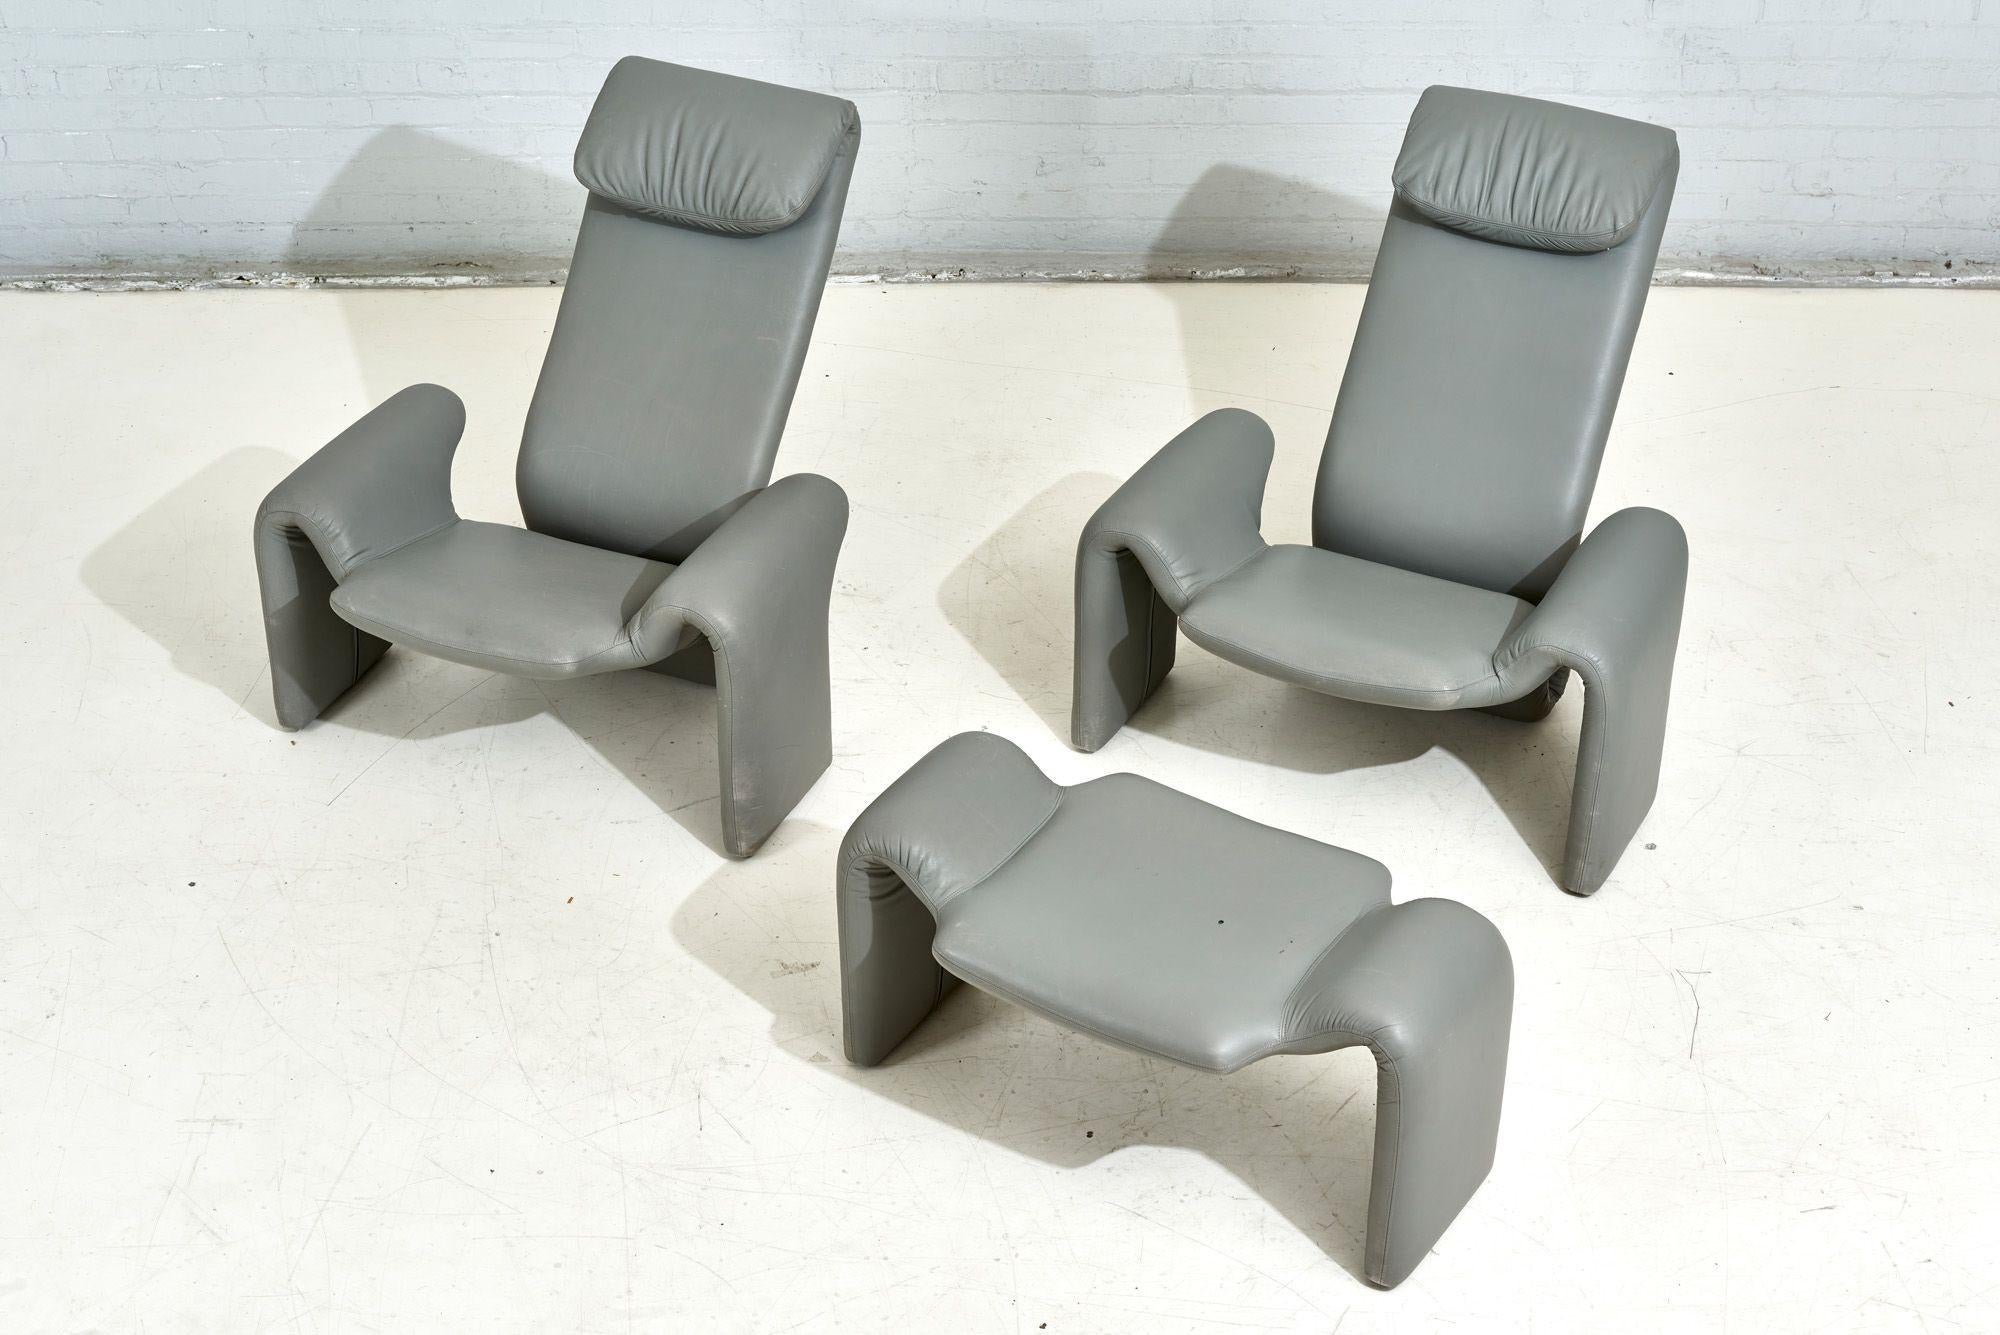 American Gray Leather Lounge Chairs and Ottoman by Steve Leonard for Brayton Intl, 1980 For Sale